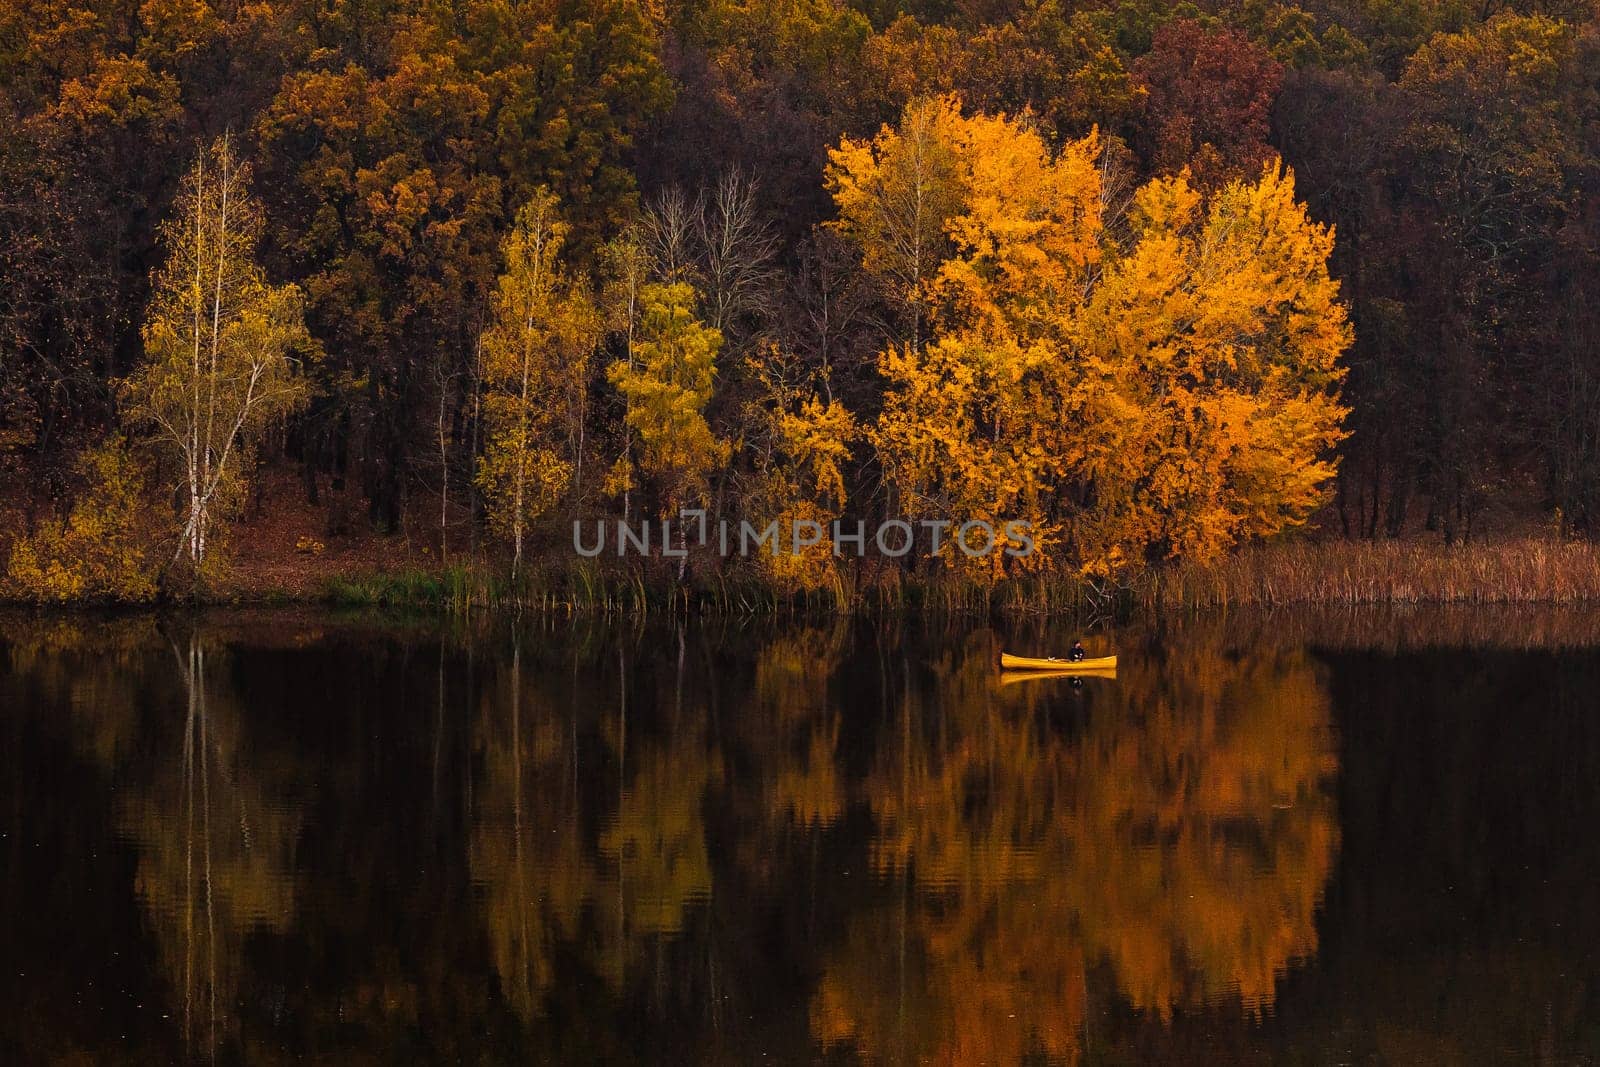 Man in yellow boat on the river in golden autumn, beautiful nature with colorful yellow trees and reflections on the water by OnPhotoUa